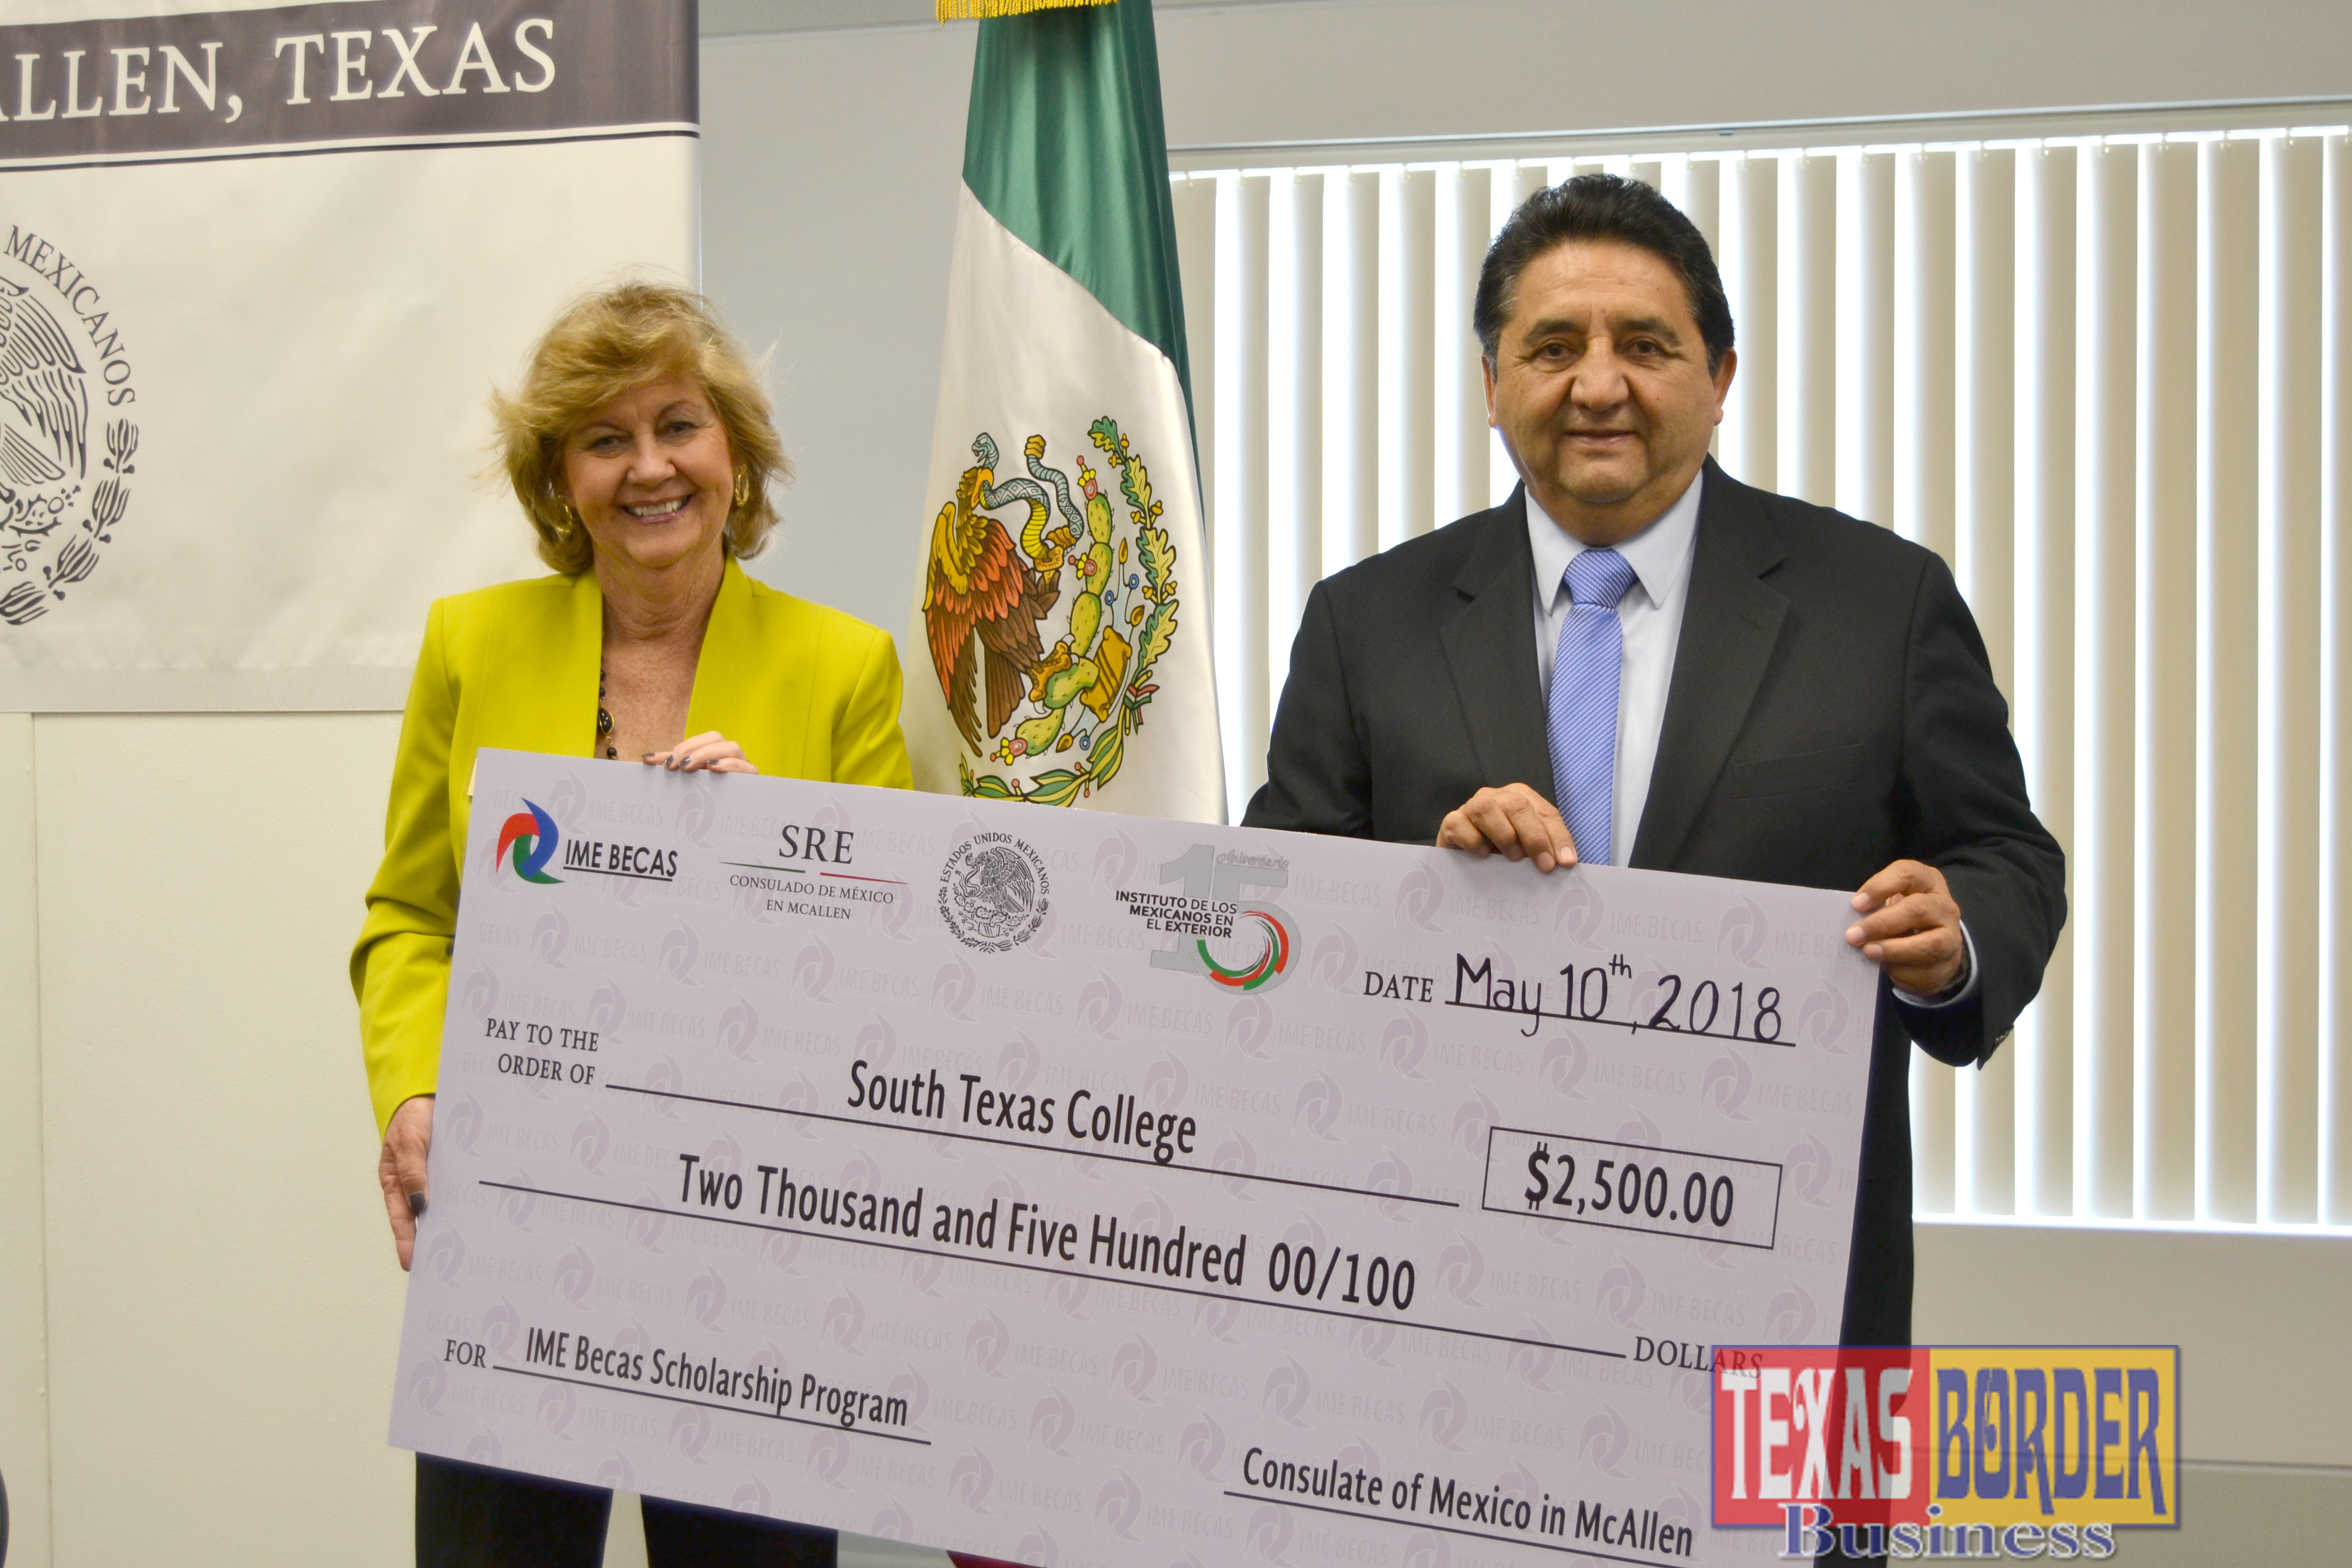 South Texas College President Dr. Shirley A. Reed (left) and the Consul of Mexico in McAllen, Eduardo Bernal Martinez formalized an official IME Becas amendment to a Memorandum of Understanding (MOU) signed in December 2017 to increase the educational attainment level of Mexicans or persons of Mexican origin living in the US. The Consulate will be providing STC with $2,500 in order to provide scholarships to qualifying students. STC will match those funds for a total of $5,000. The scholarship funds will benefit 10 eligible students at South Texas College at $500 per student.